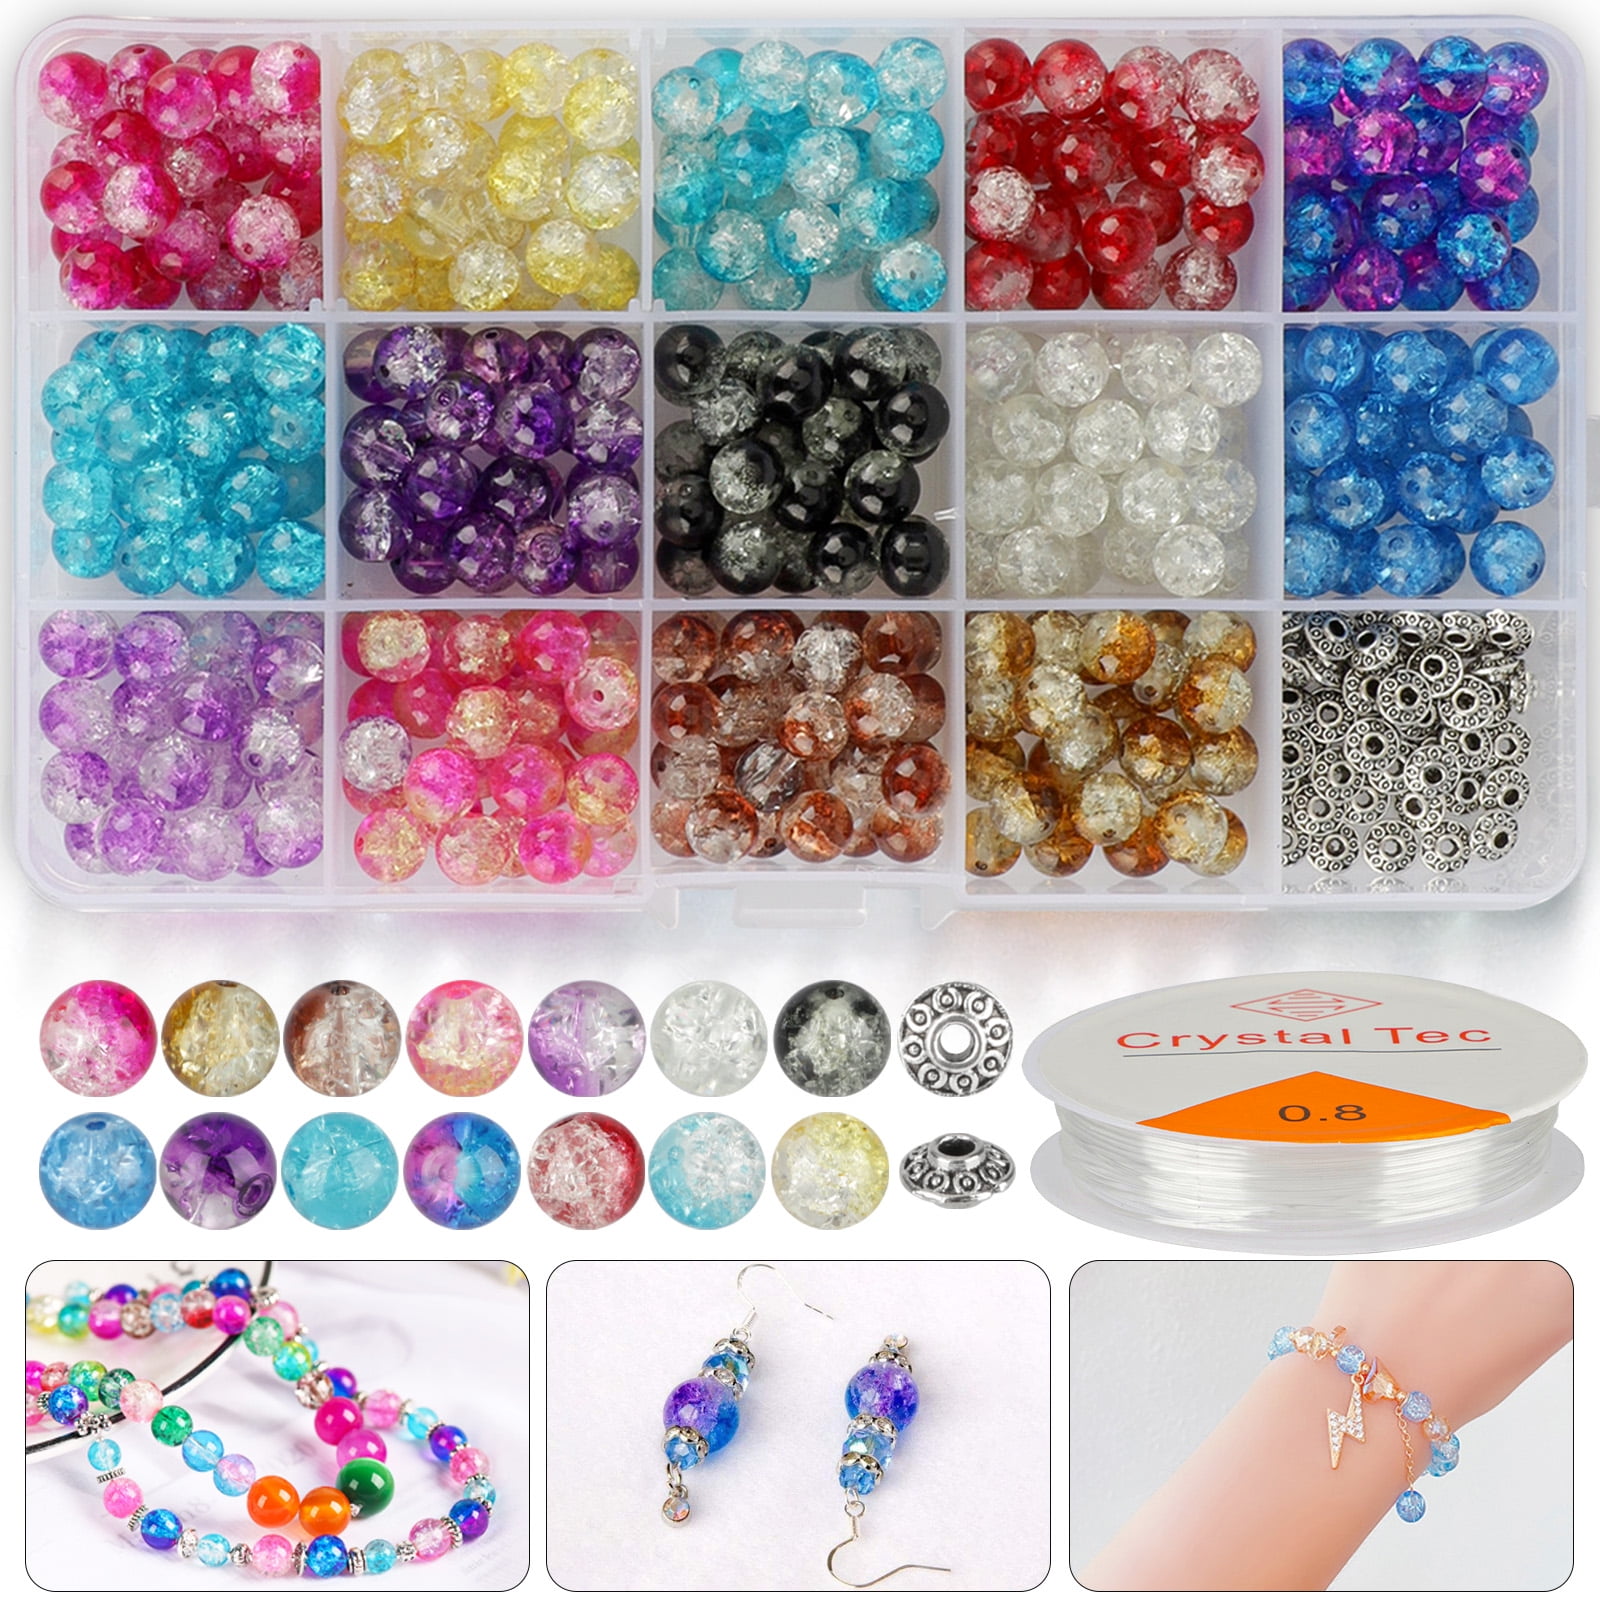 WEWAYSMILE 1500 Pcs Crackle Glass Beads 4mm 6mm 8mm 10mm Round Glass  Assorted Beads 24 Styles Spacer Loose Beads for Bracelets Earring Necklace